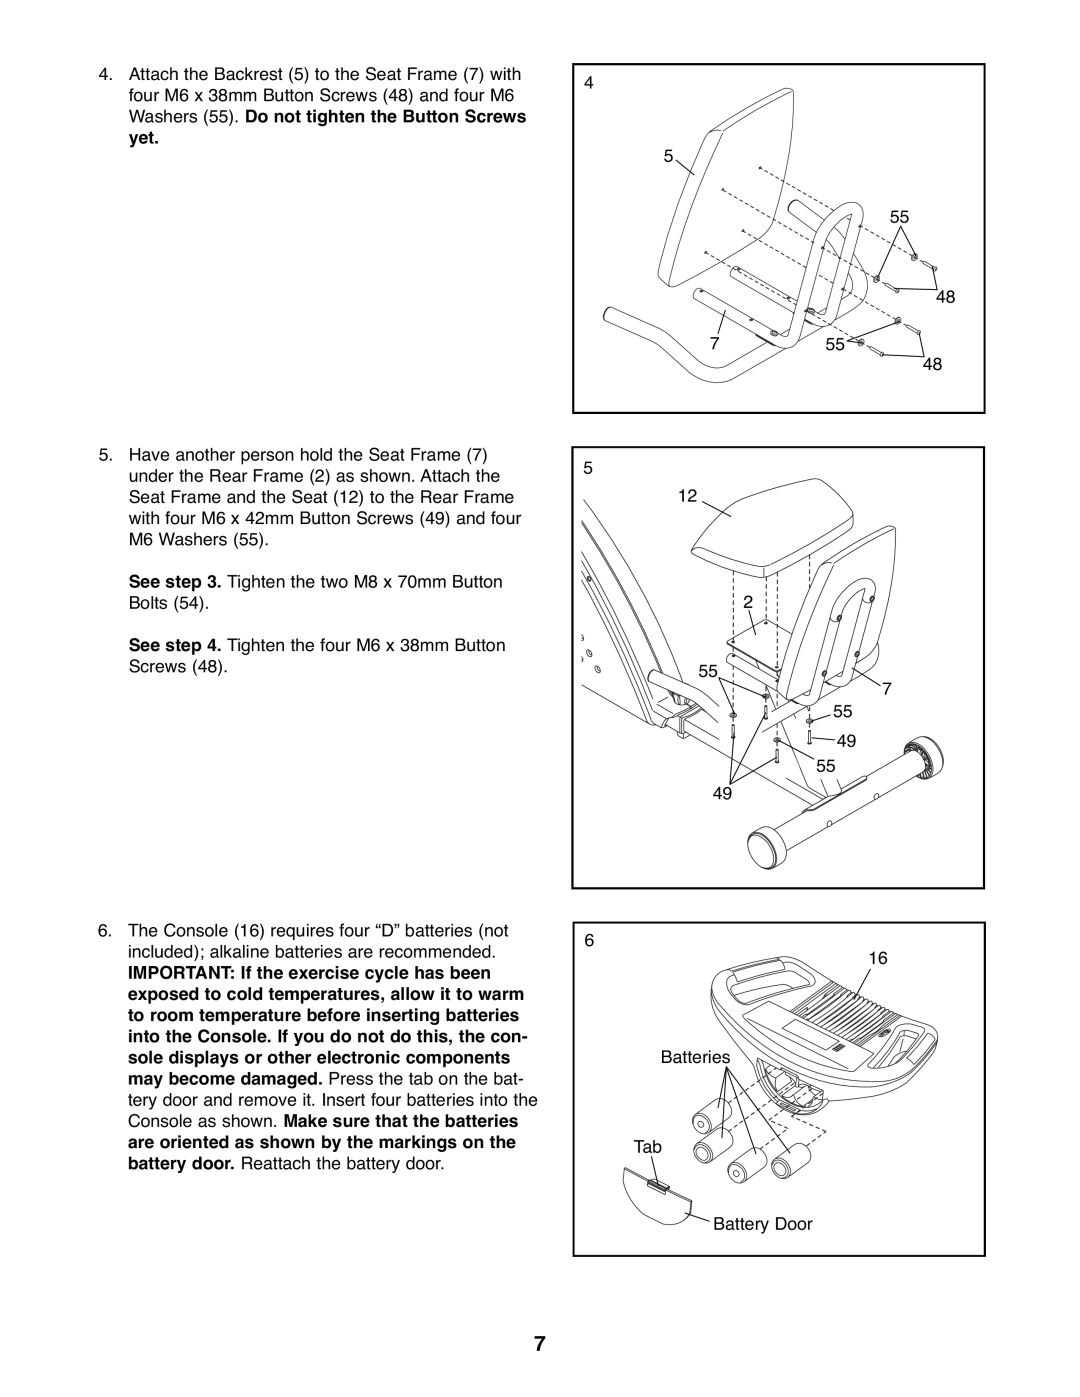 ProForm PFEX1995.1 user manual See . Tighten the two M8 x 70mm Button Bolts 